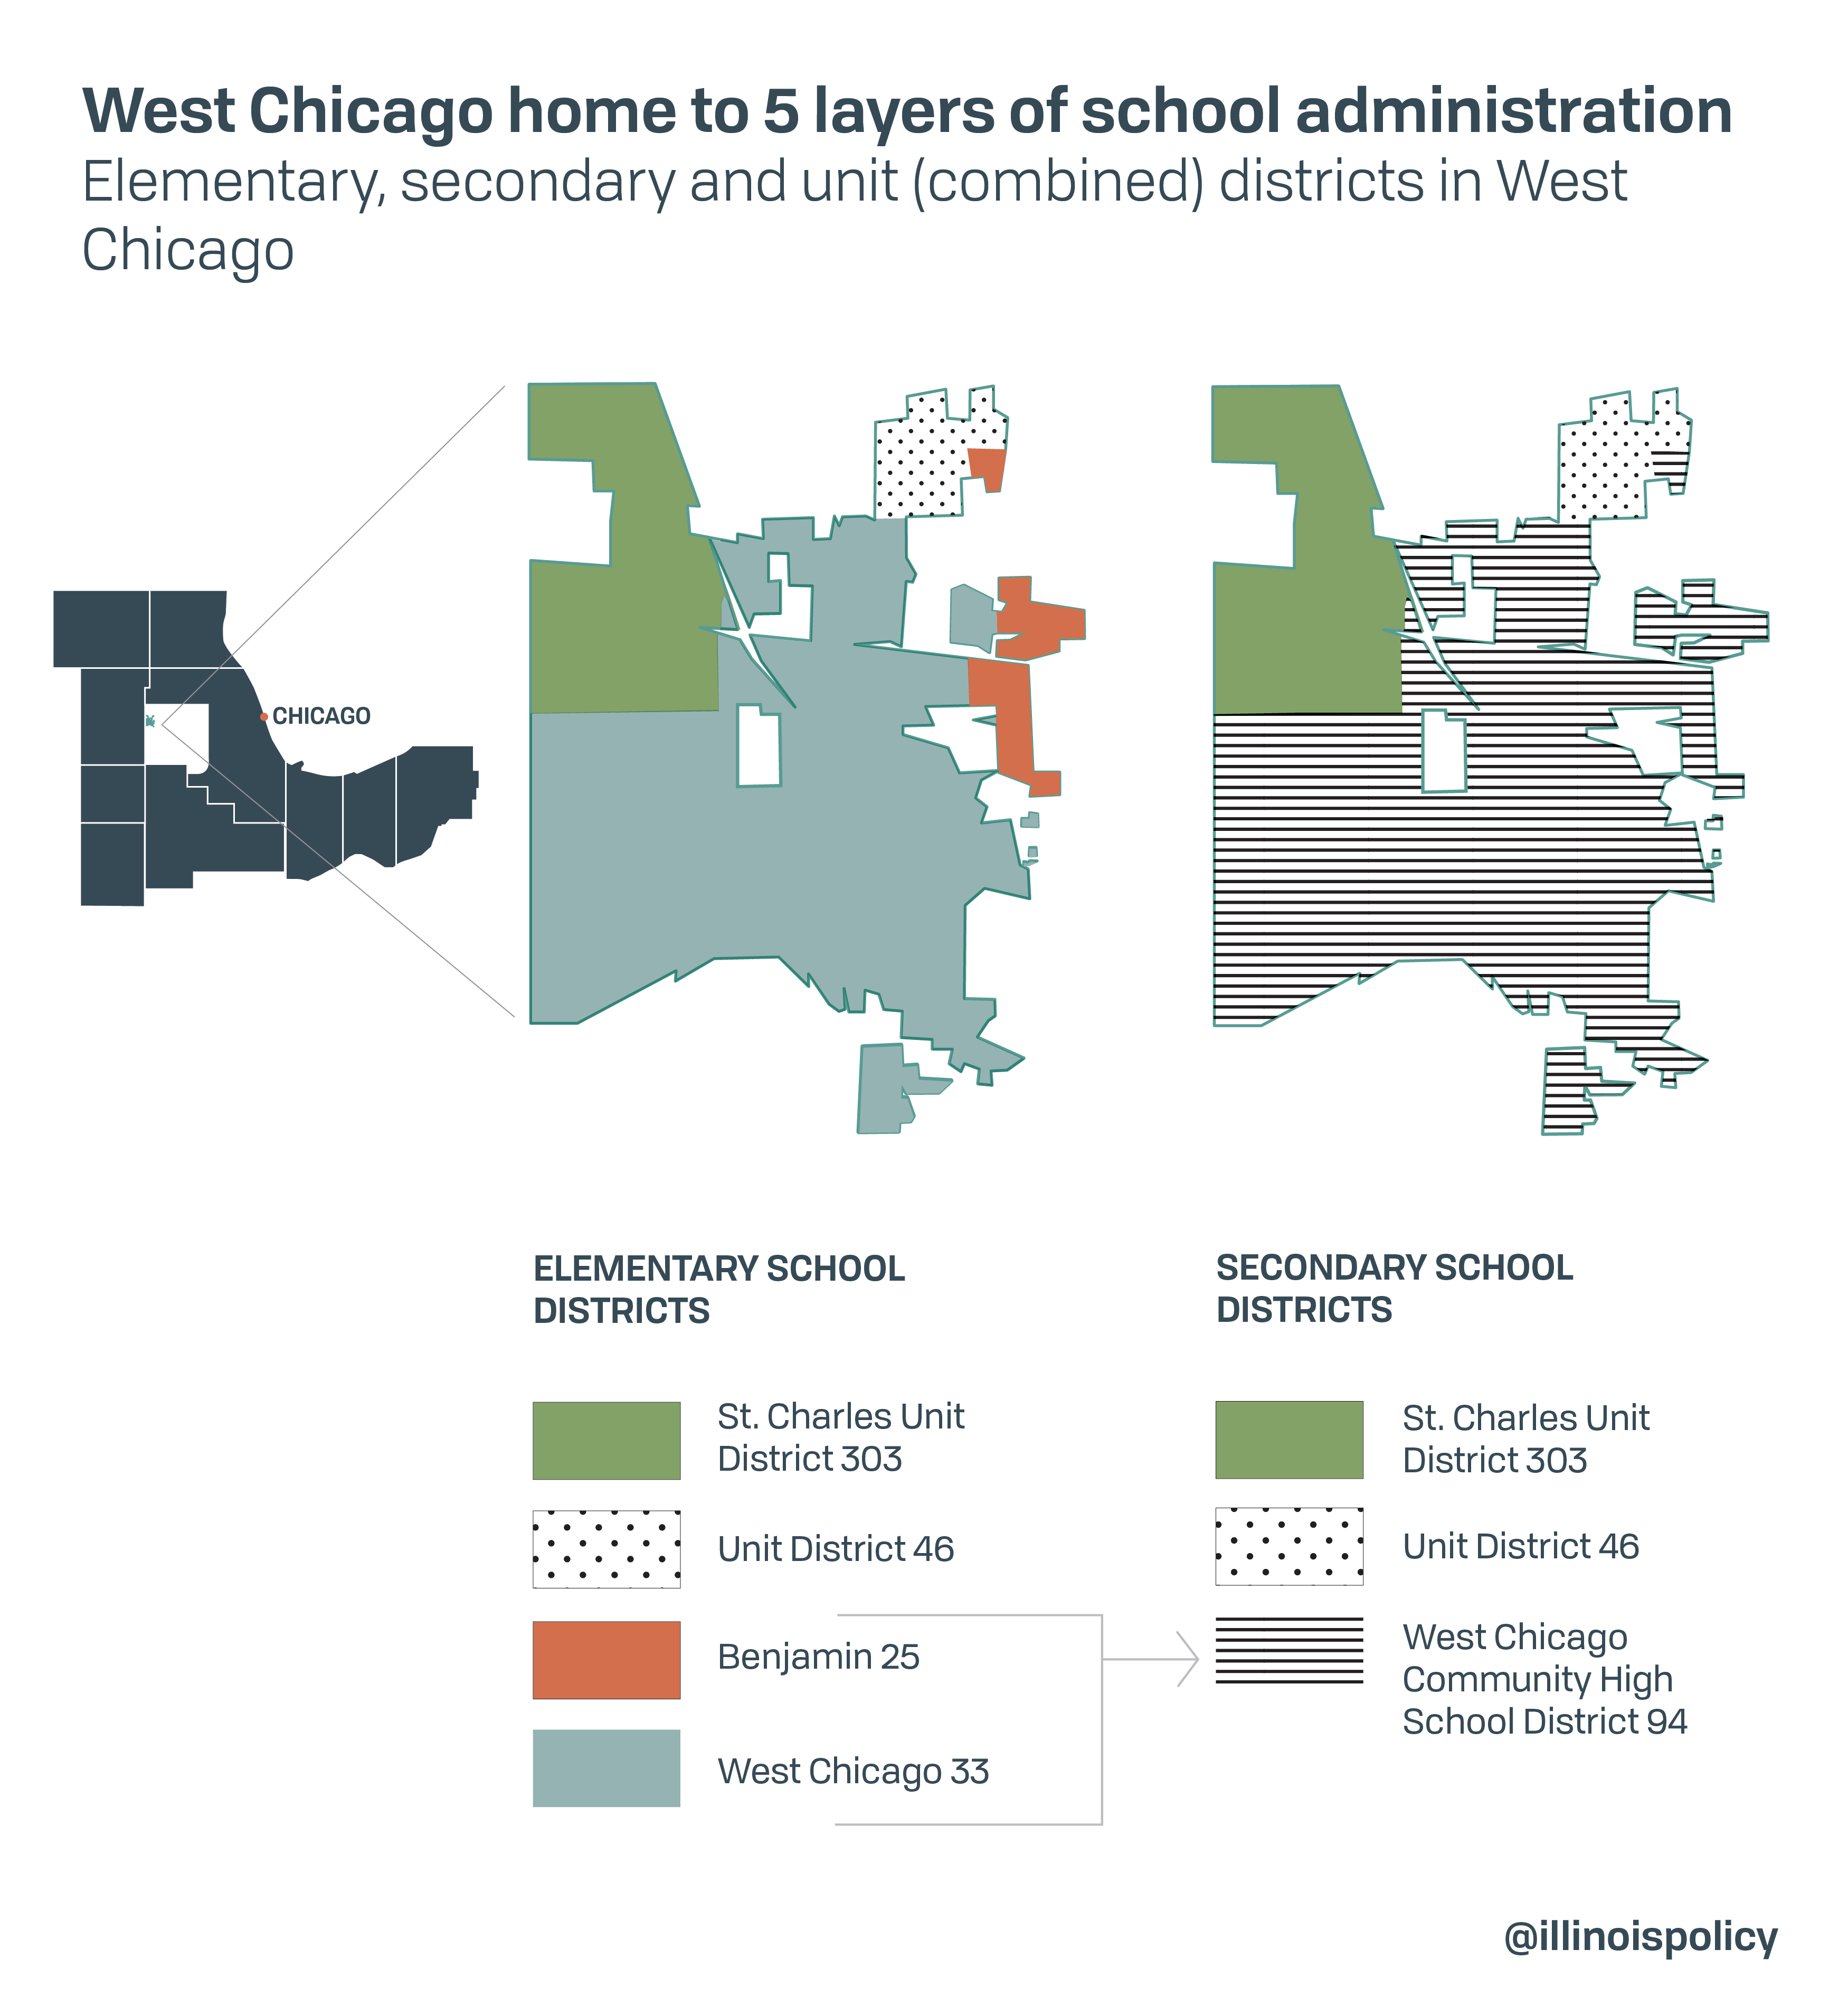 West Chicago home to 5 layers of school administration